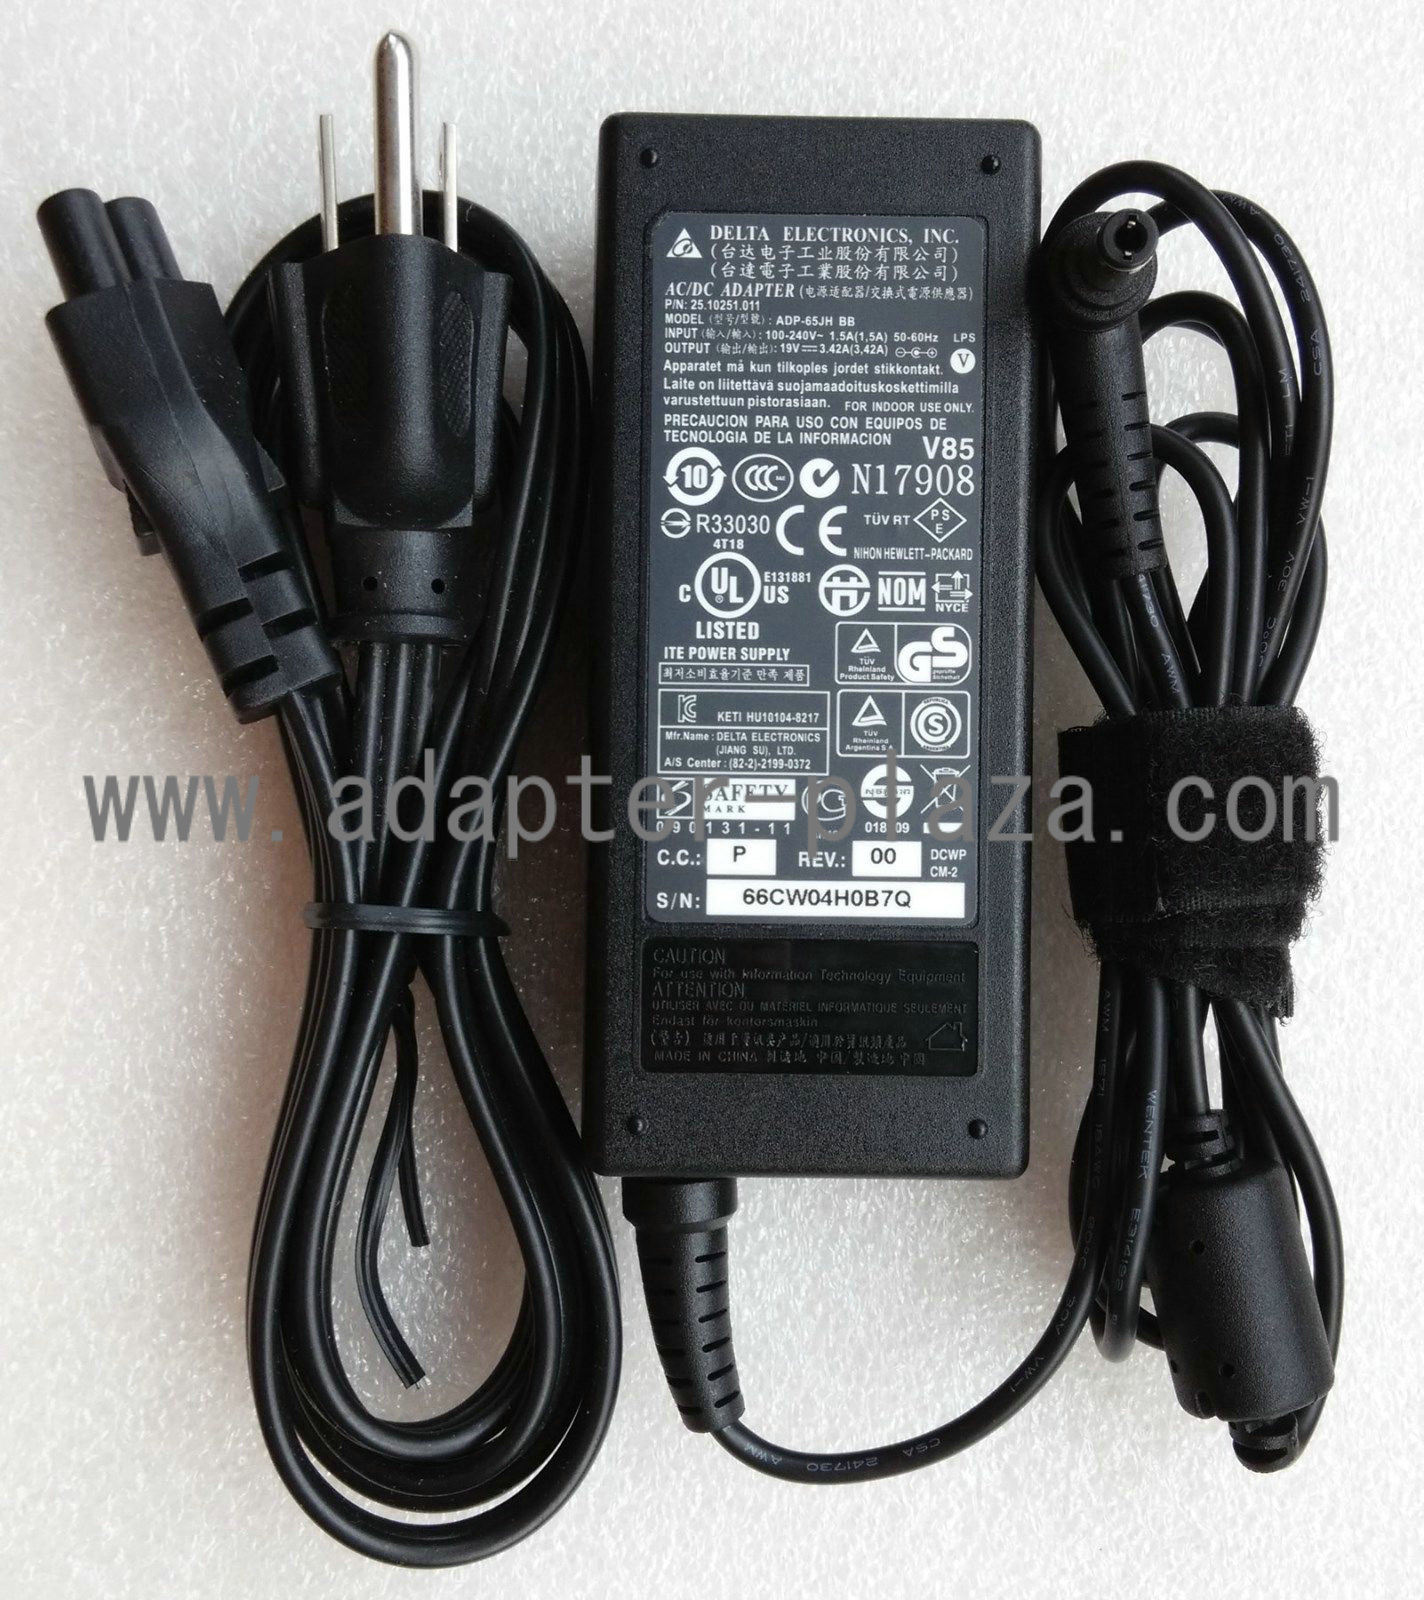 New Genuine Delta 65W 19V 3.42A ADP-65HB BB AC Adapter for Clevo W550SU1 Notebook - Click Image to Close